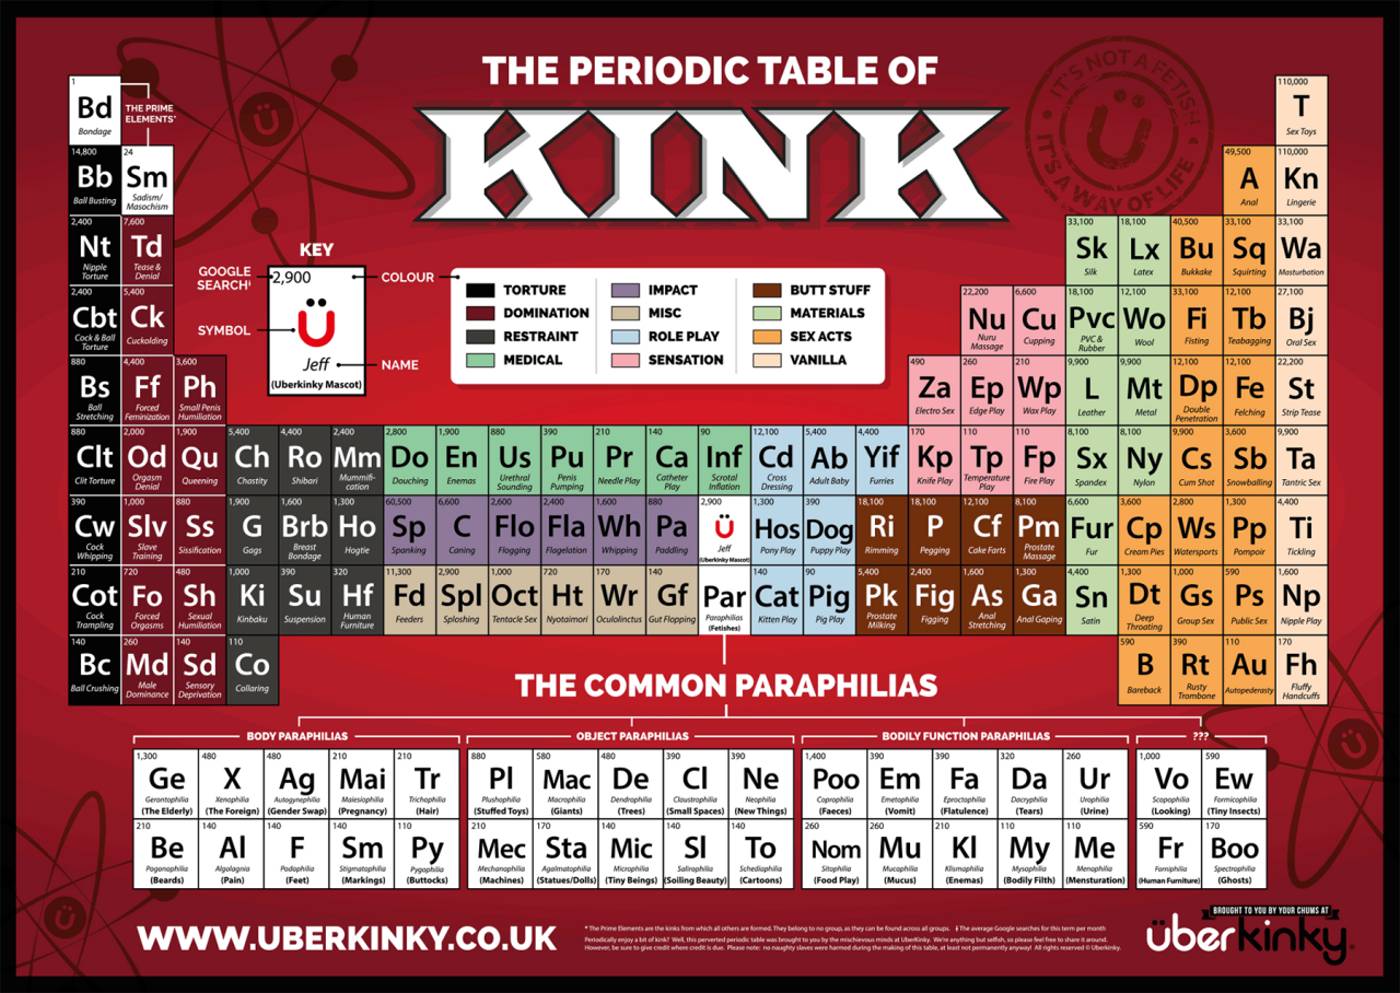 The Periodic Table of KINK.jpg